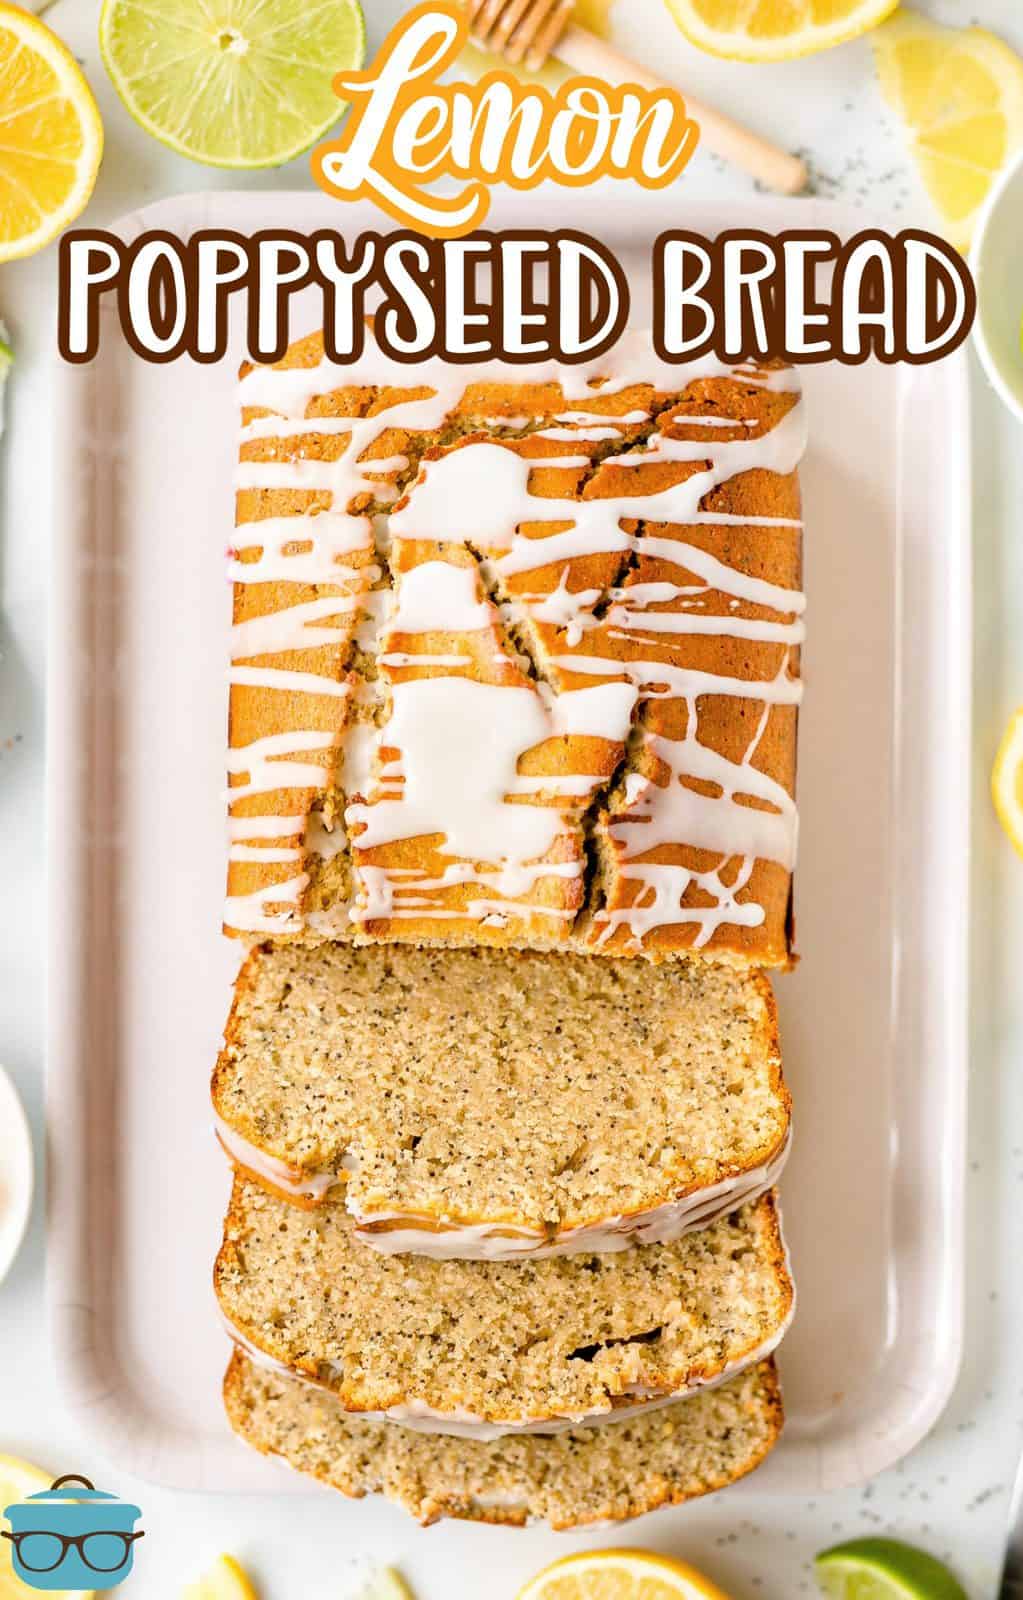 Pinterest image overhead of Lemon Poppy Seed Bread with some slices cut off loaf glazed.